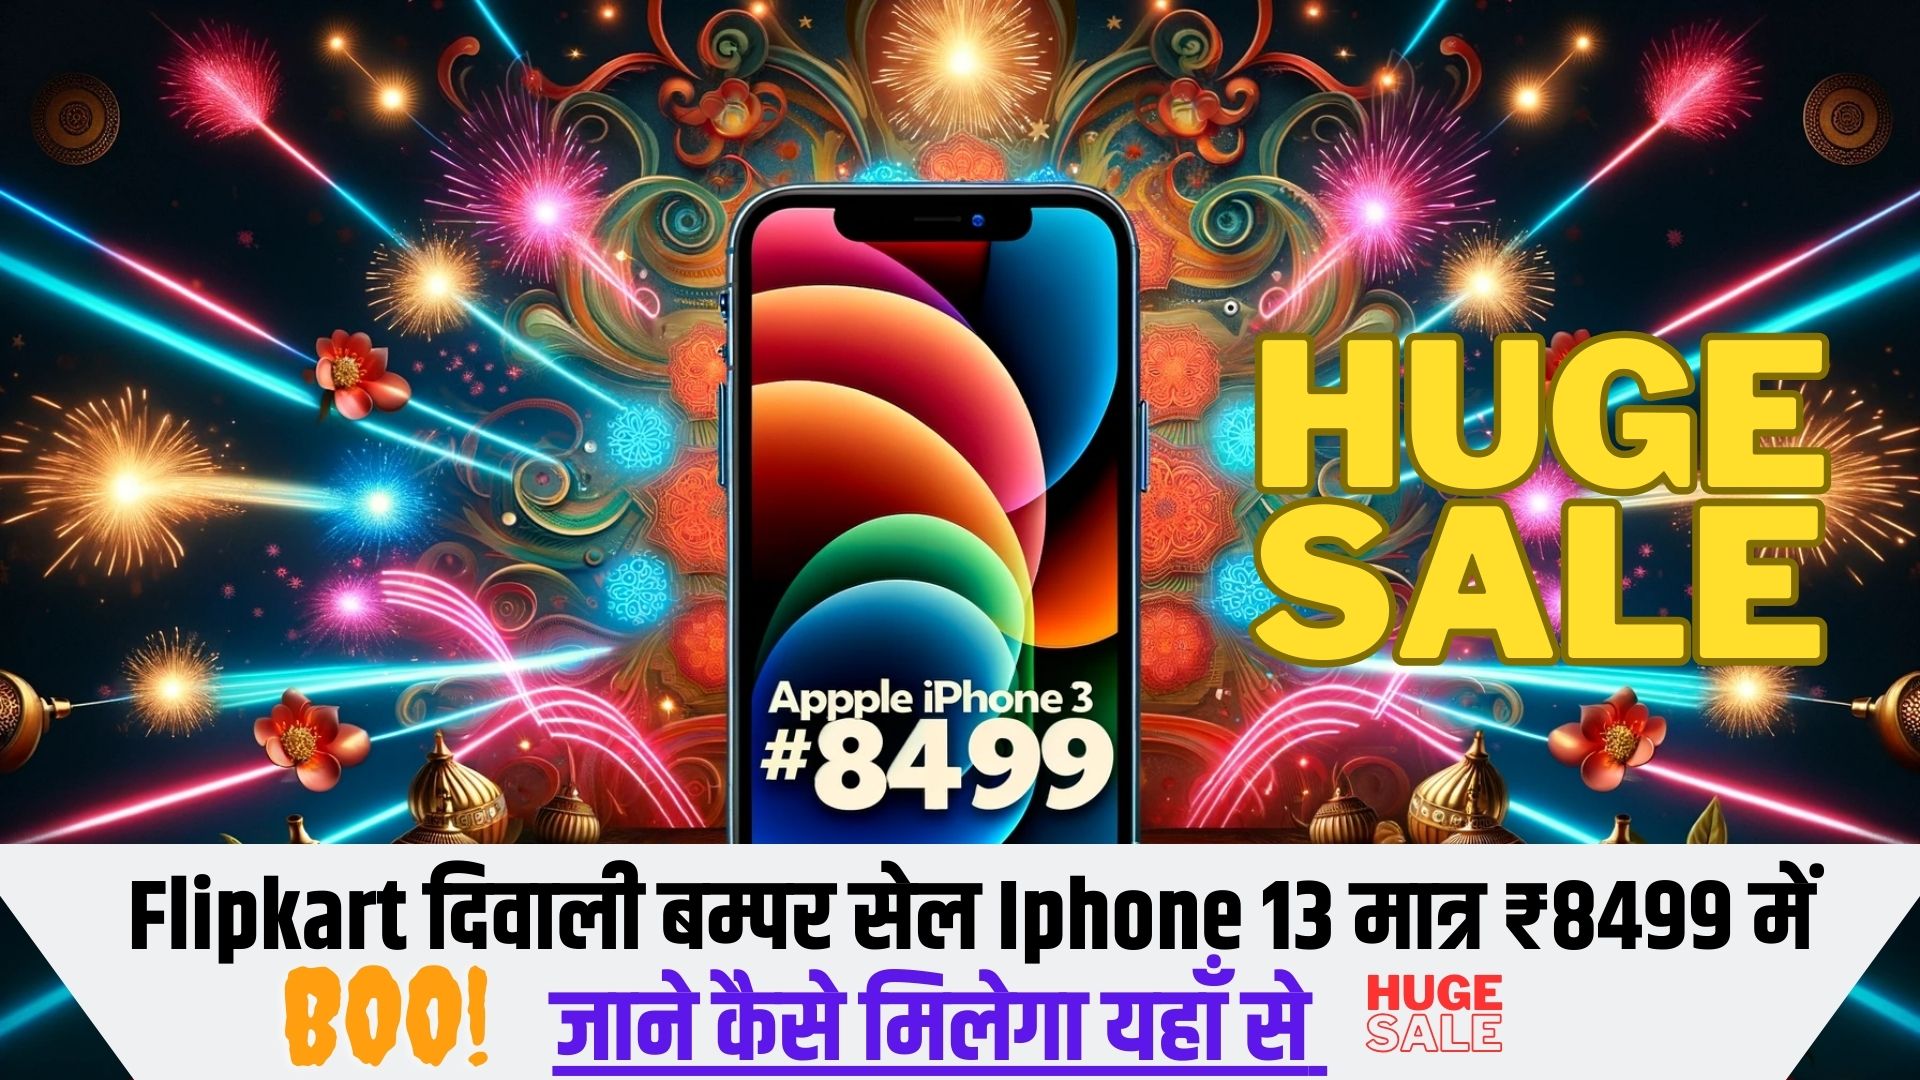 Apple iPhone 13 @8499 during the Flipkart Diwali Sale with a discount of Rs 43,500. Details inside, Diwali Sale On iPhone 13